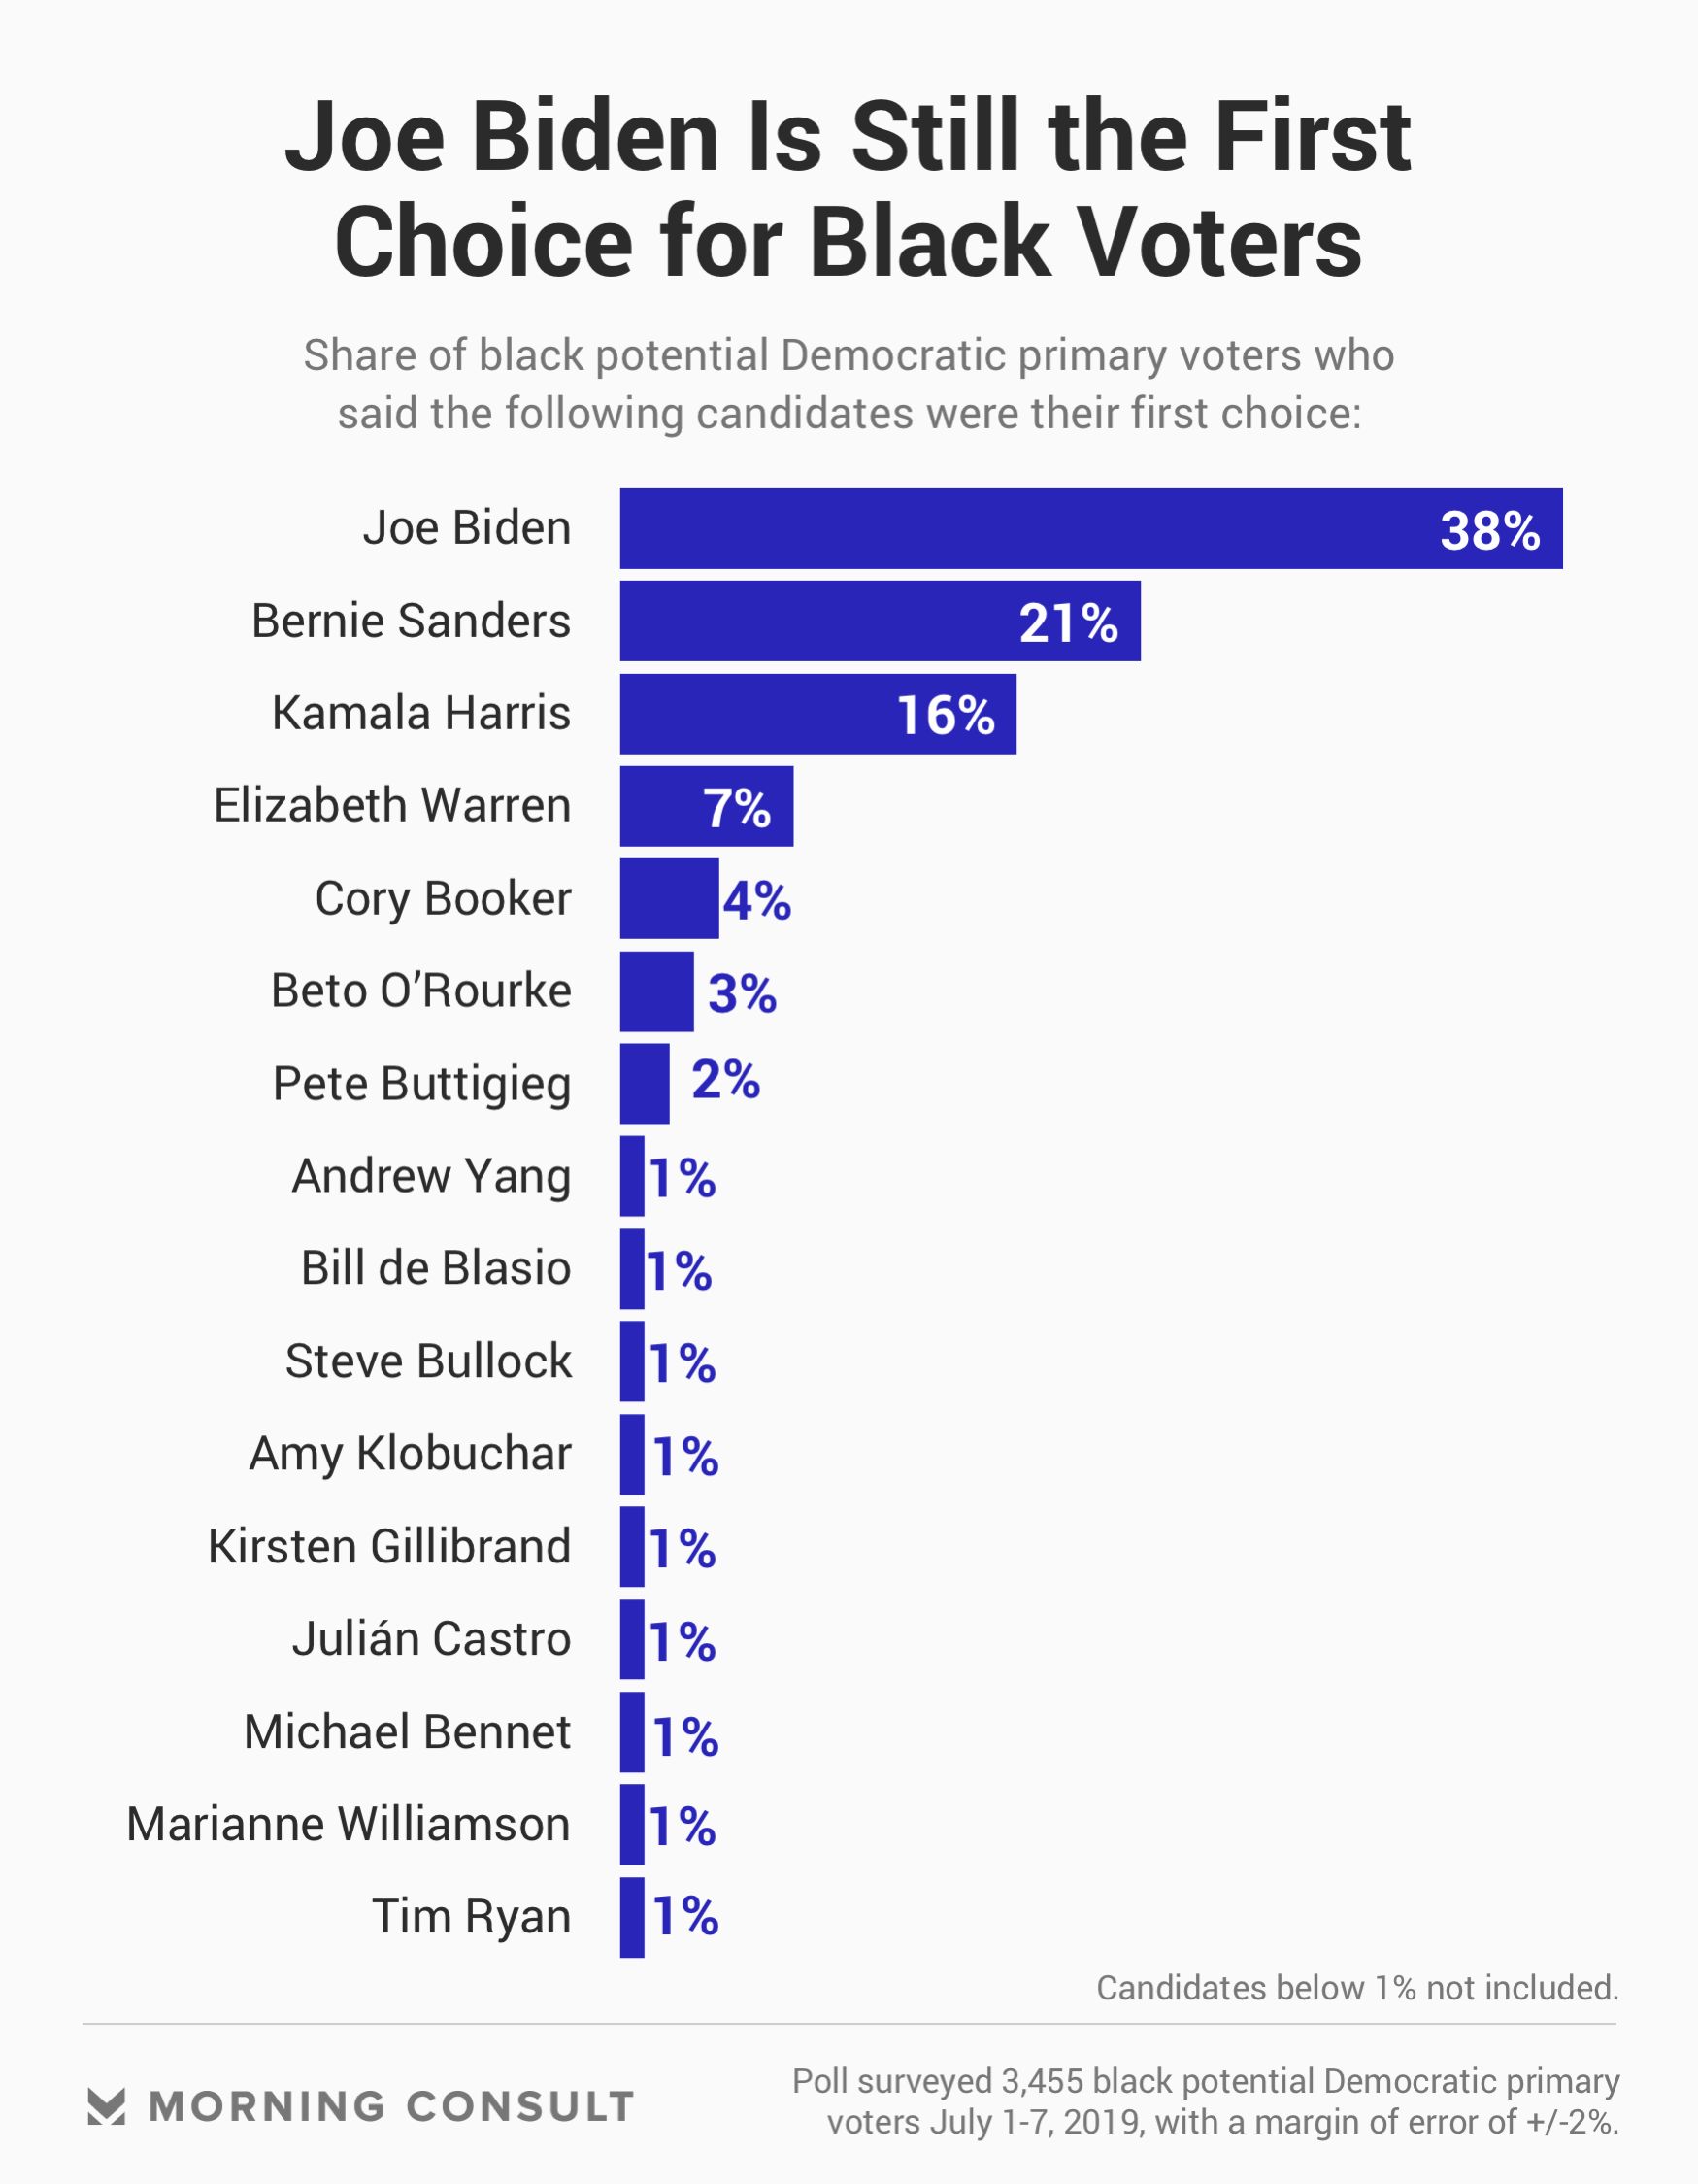 190708_Black-Voters-First-Choice_Sidebar.png